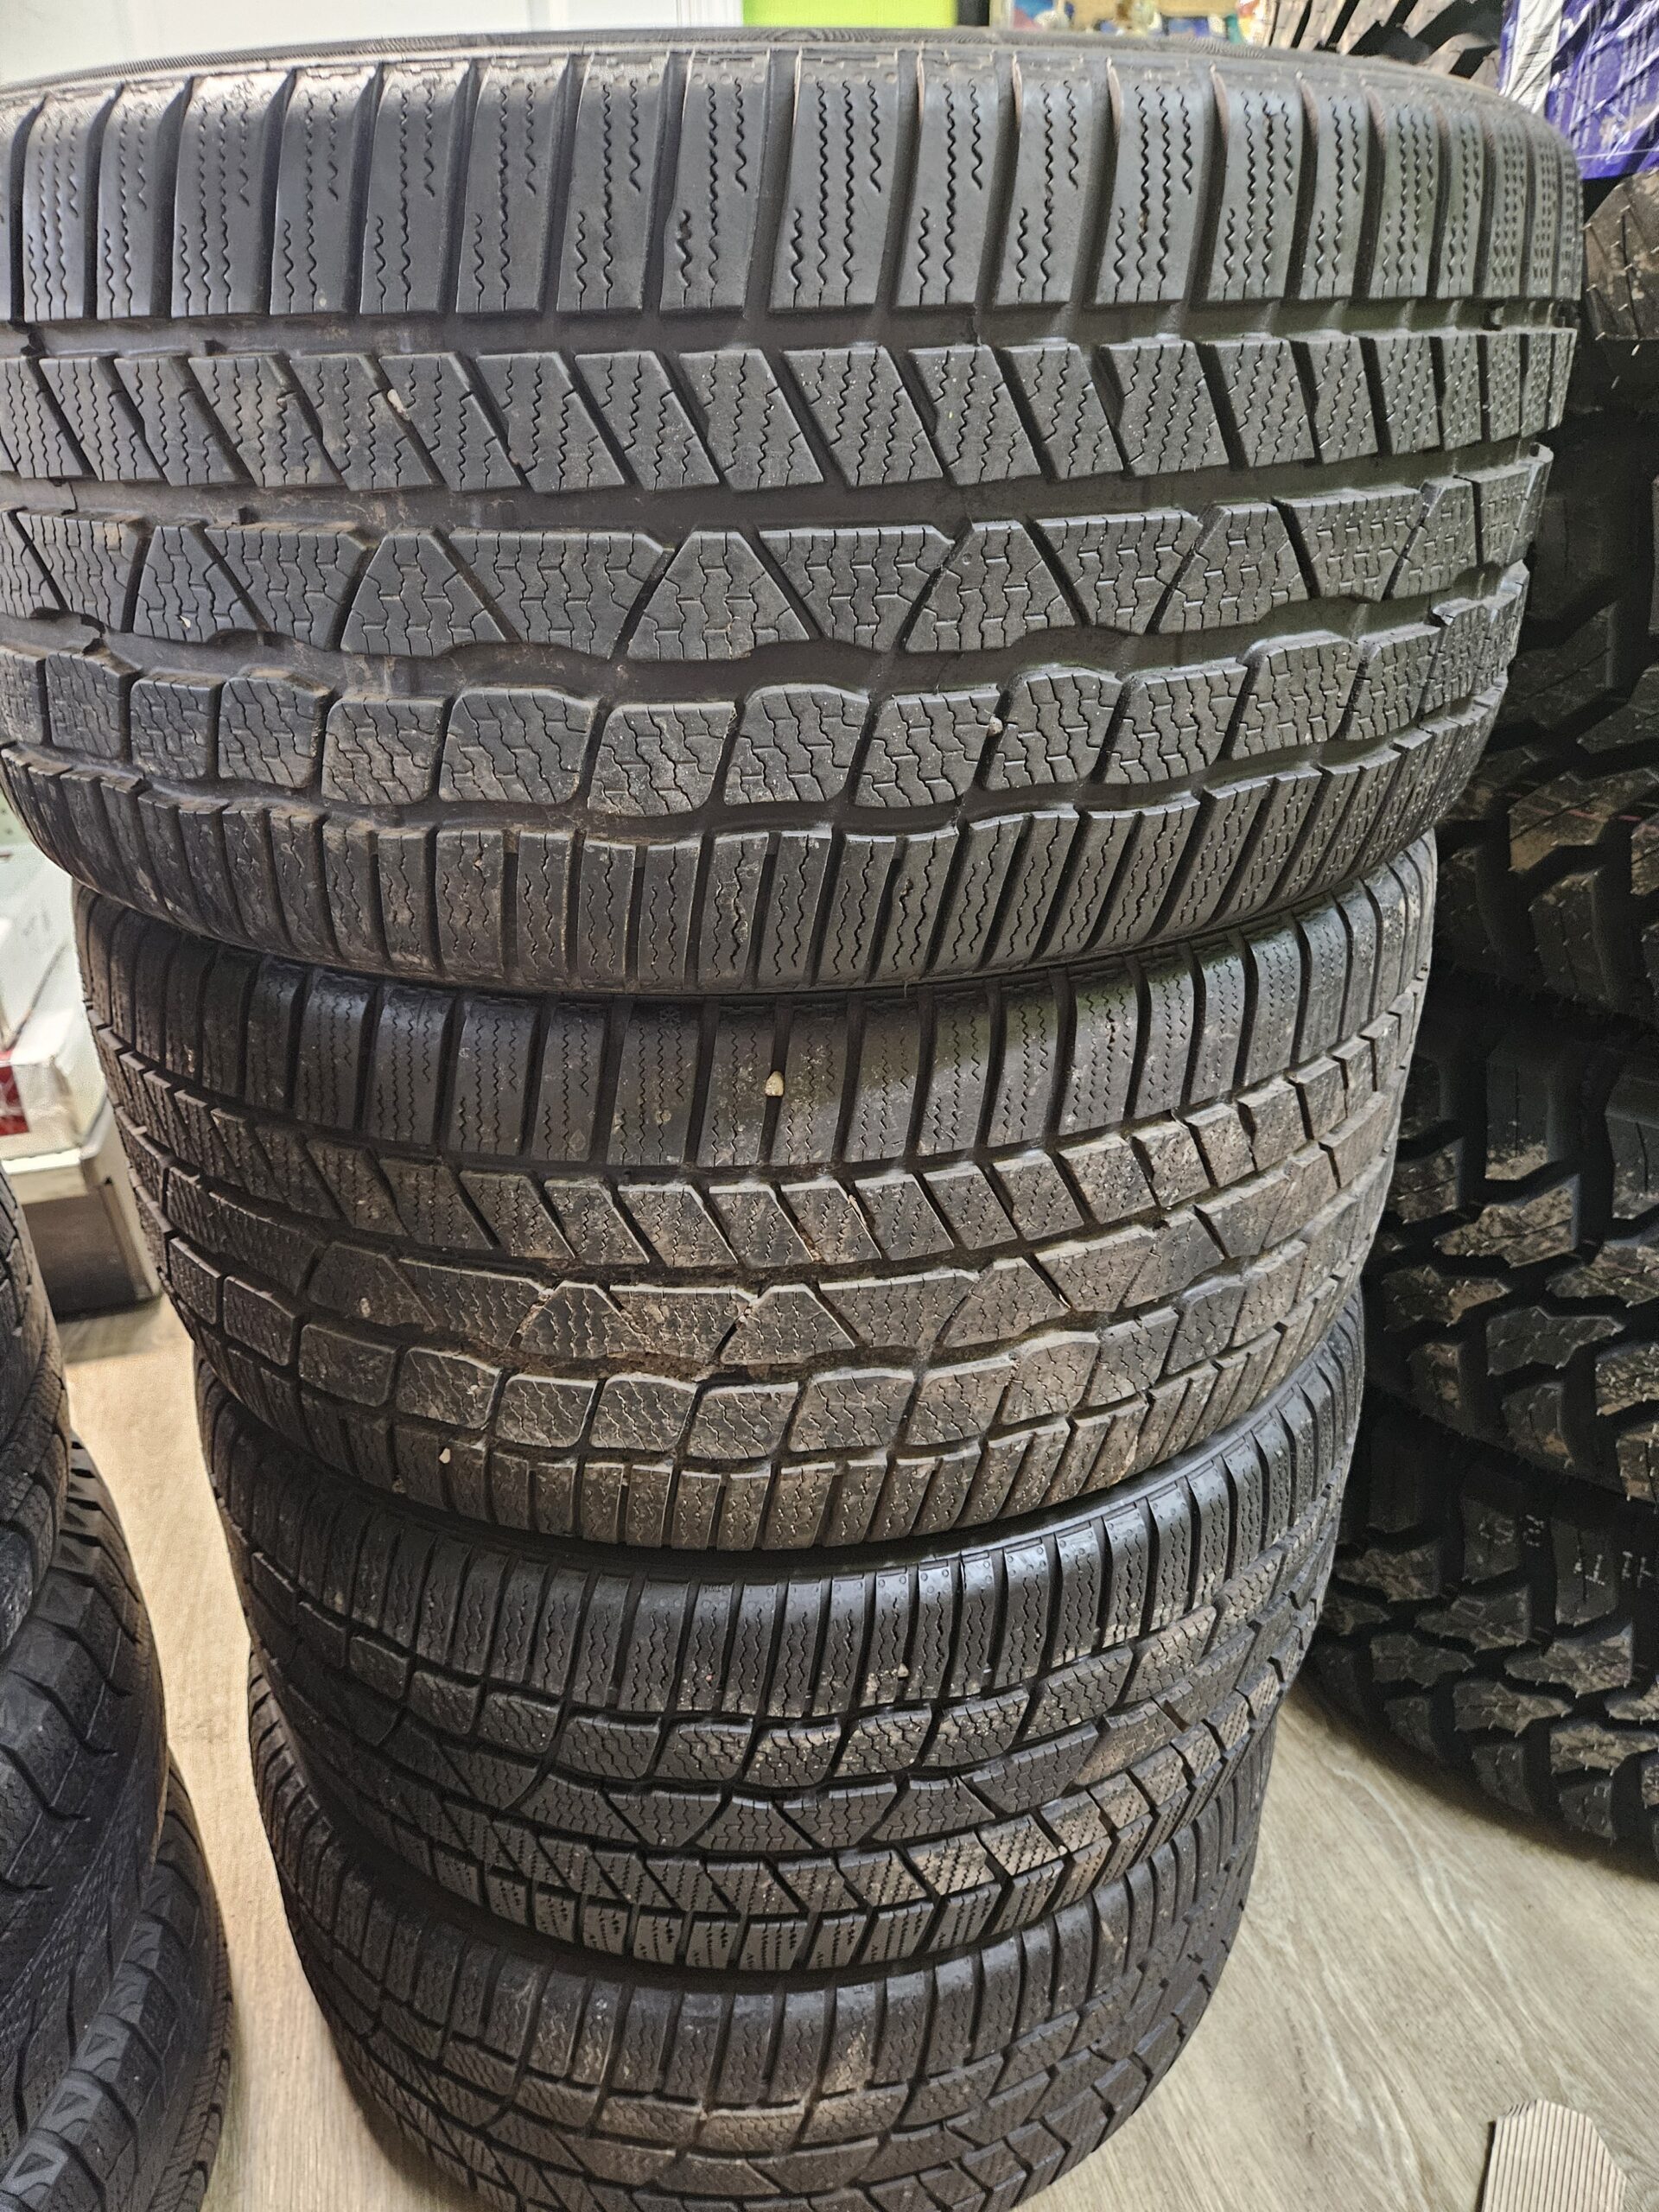 255/35R20 Continental Winter Tires